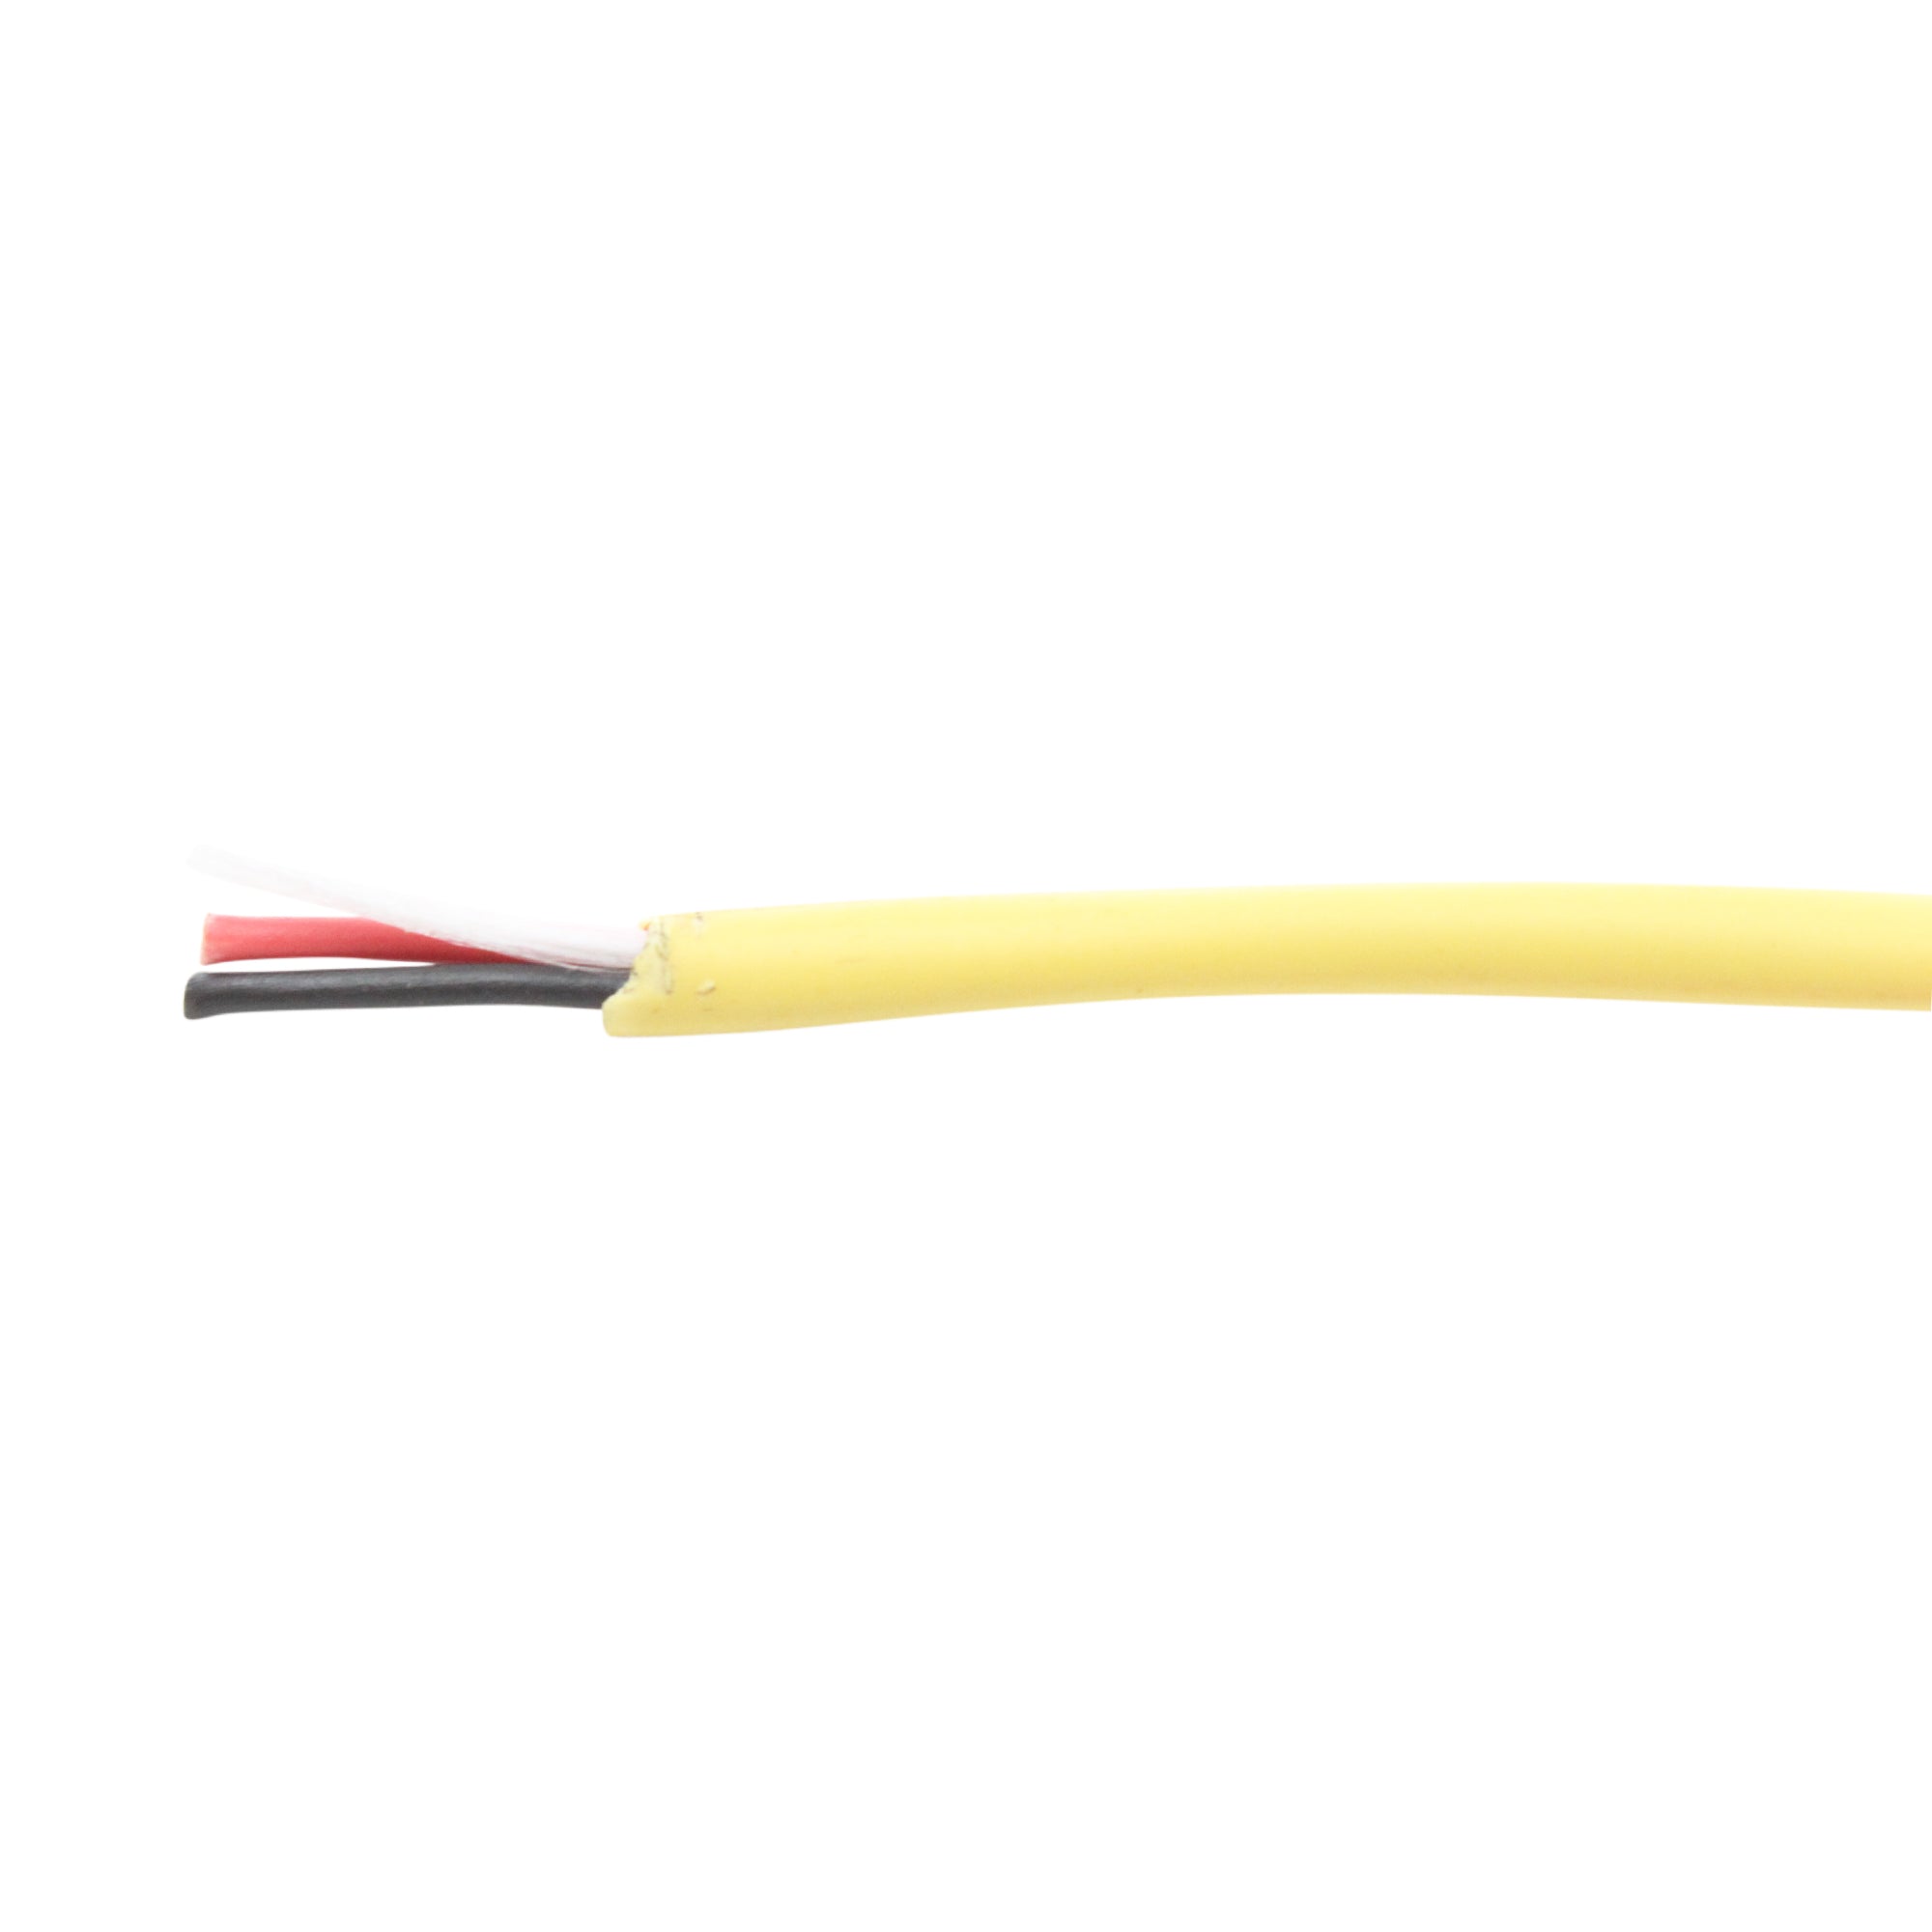 FASTER CABLE, FASTER CABLE P222C-YEL 22AWG 2C STR CONTROL CABLE, PLENUM, YELLOW, 1000-FEET